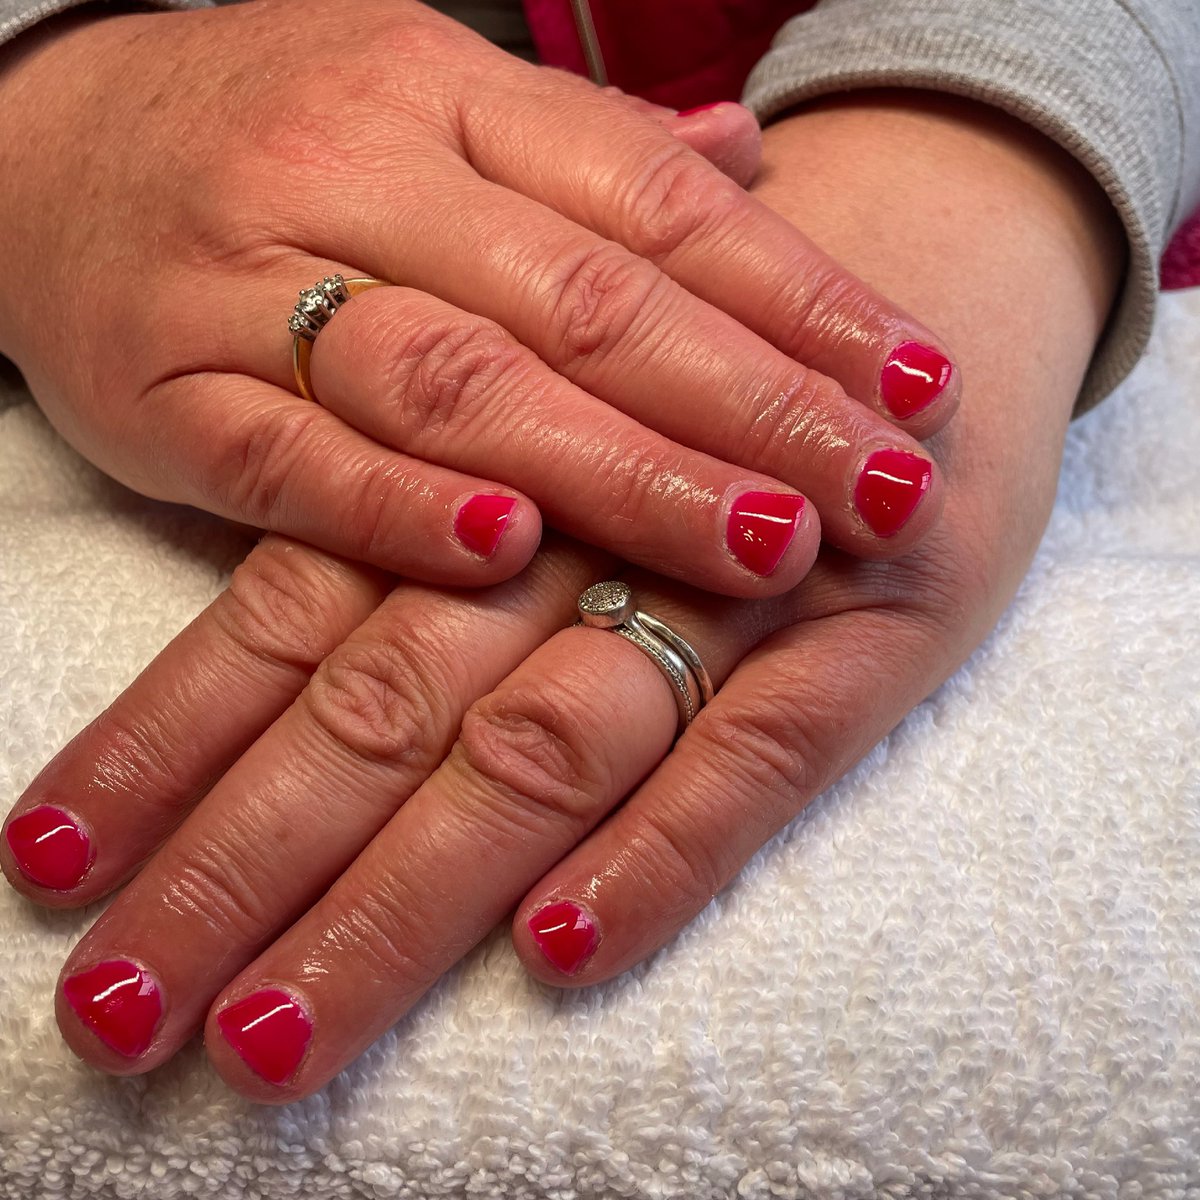 Beautiful Halo Raspberry gel applied to natural nails! Plan of attack is to strengthen nails in readiness for client’s holiday in 6 weeks. Looking forward to posting progress pics. #purenailsuk #gelnails #bamberbridge #waltonledale #prestonnails #nailsnailsnailsnails